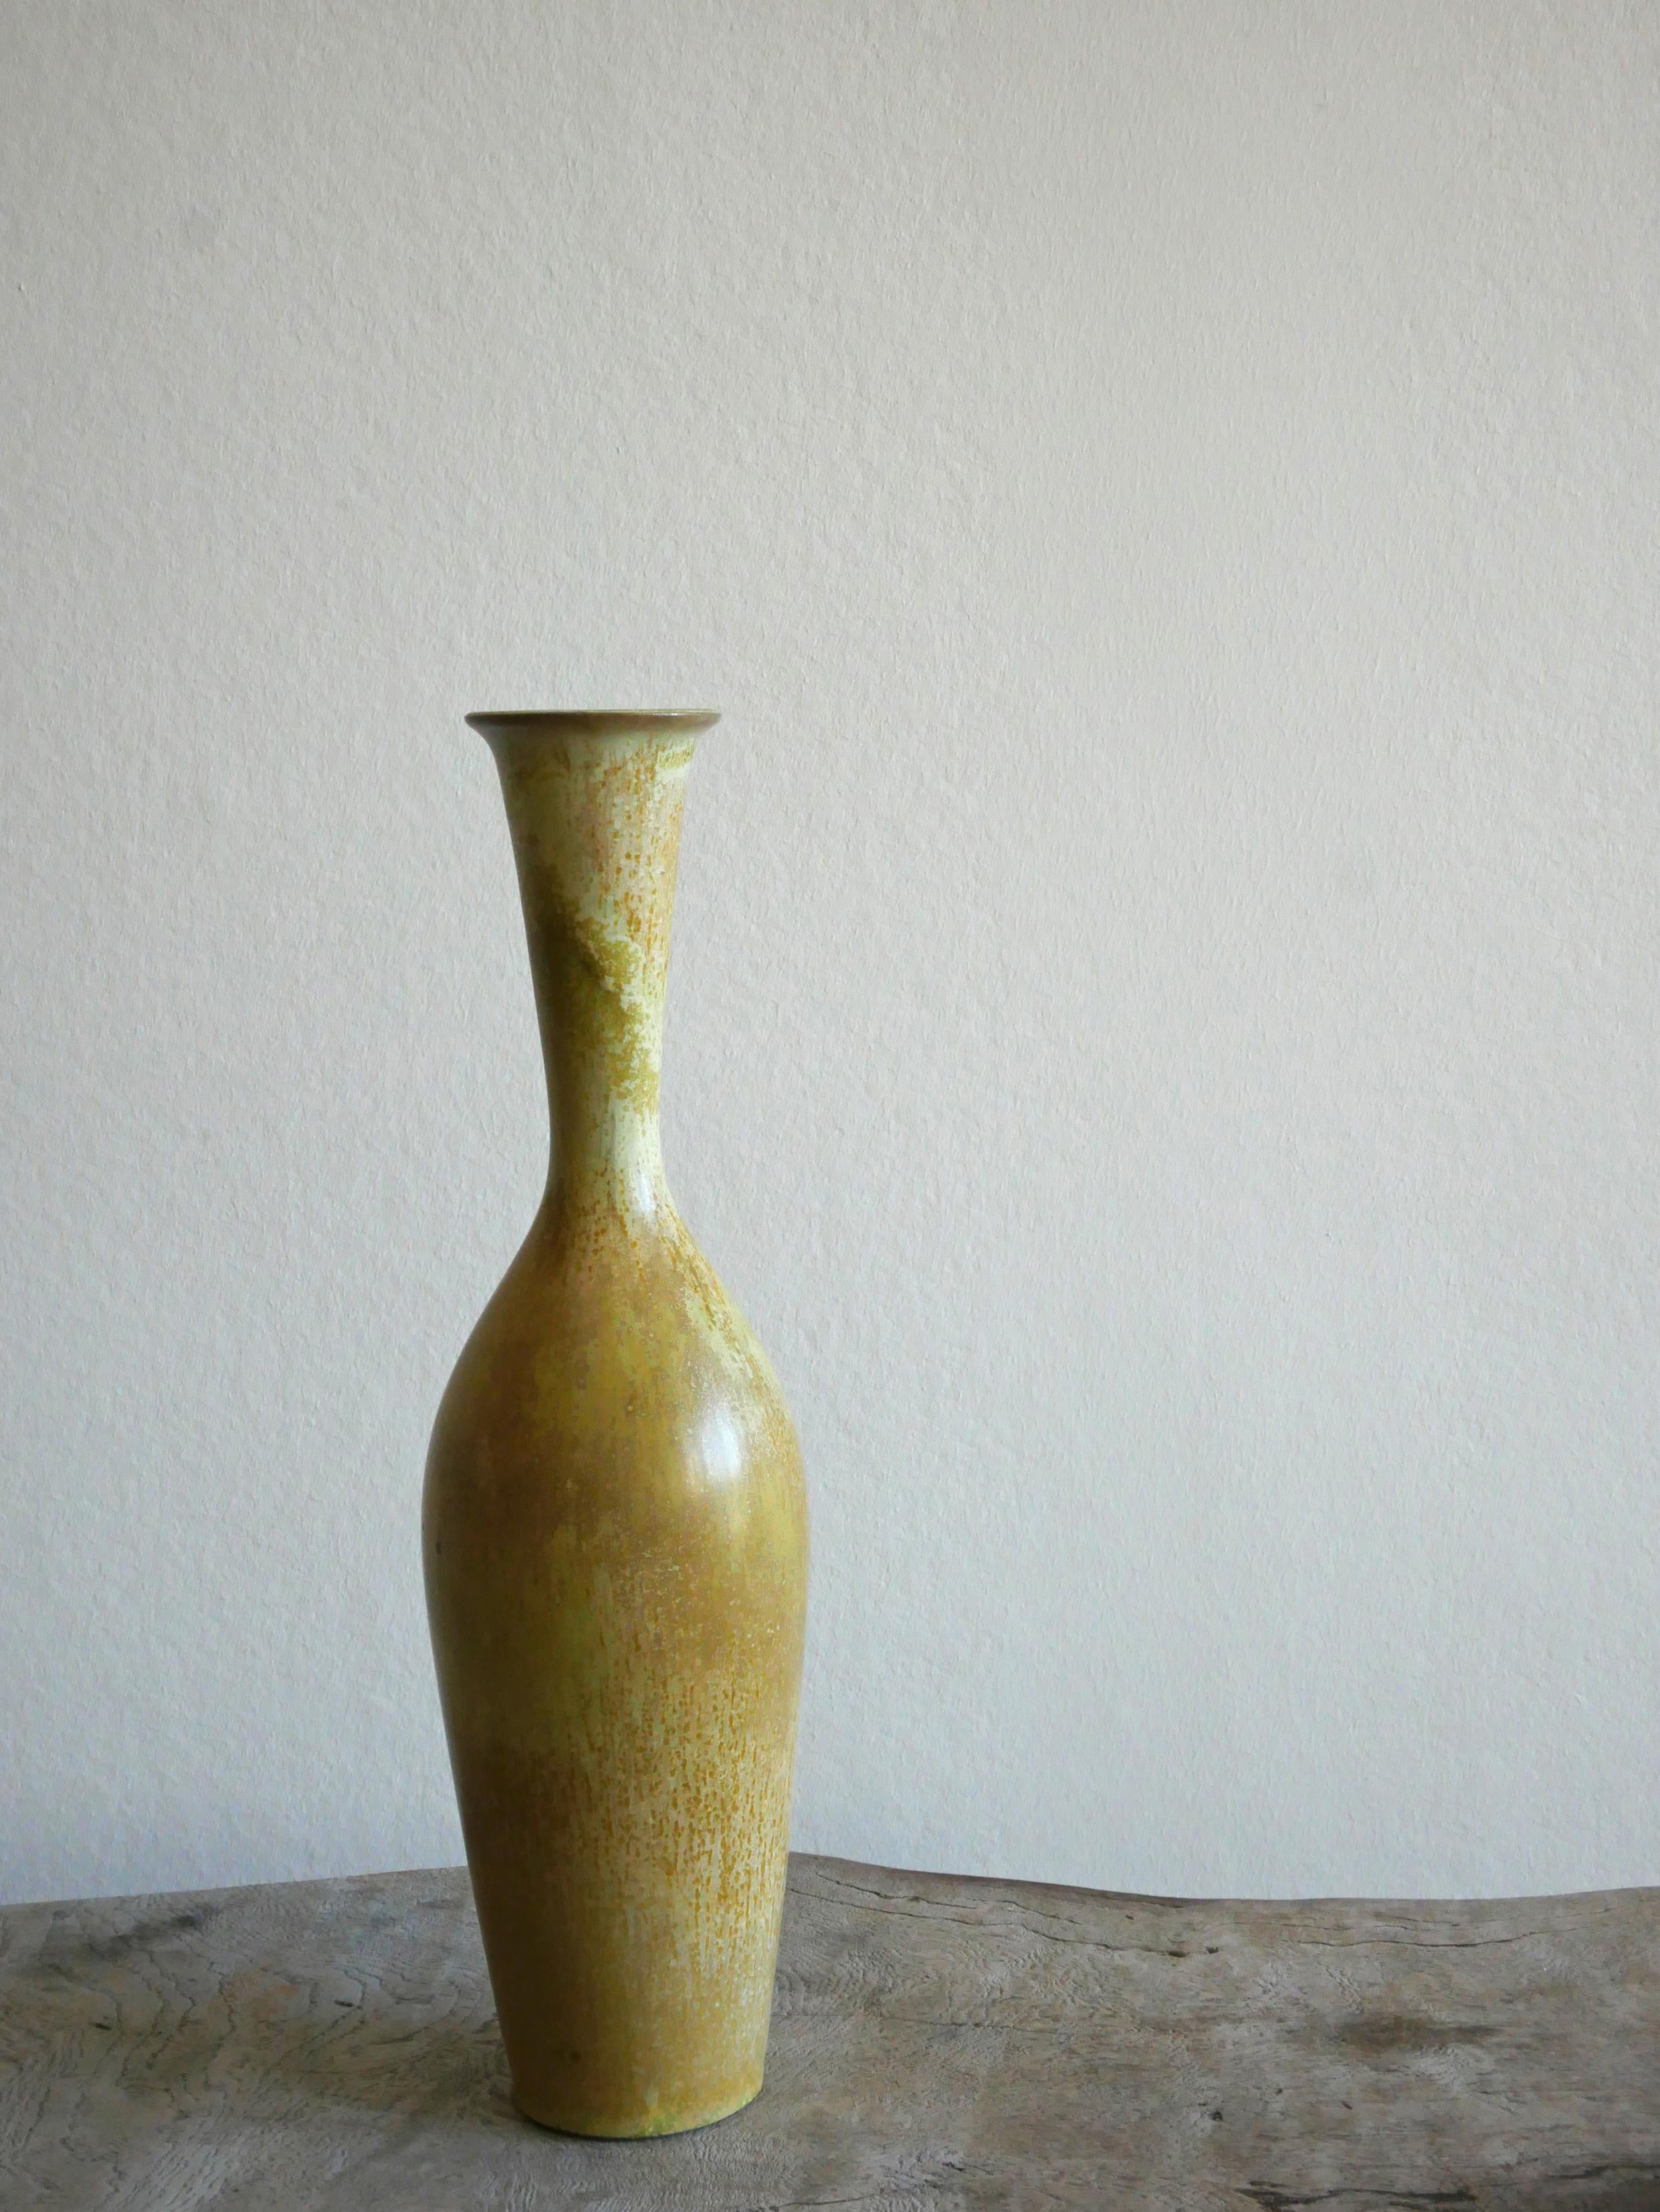 This wonderful vase was created and designed by Gunnar Nylund at the Rörstrand Factory in the 1950s Sweden.

The glaze in green and yellow colors is amazing and works beautifully with the bottleneck shaped vase form.

The vase is 2nd